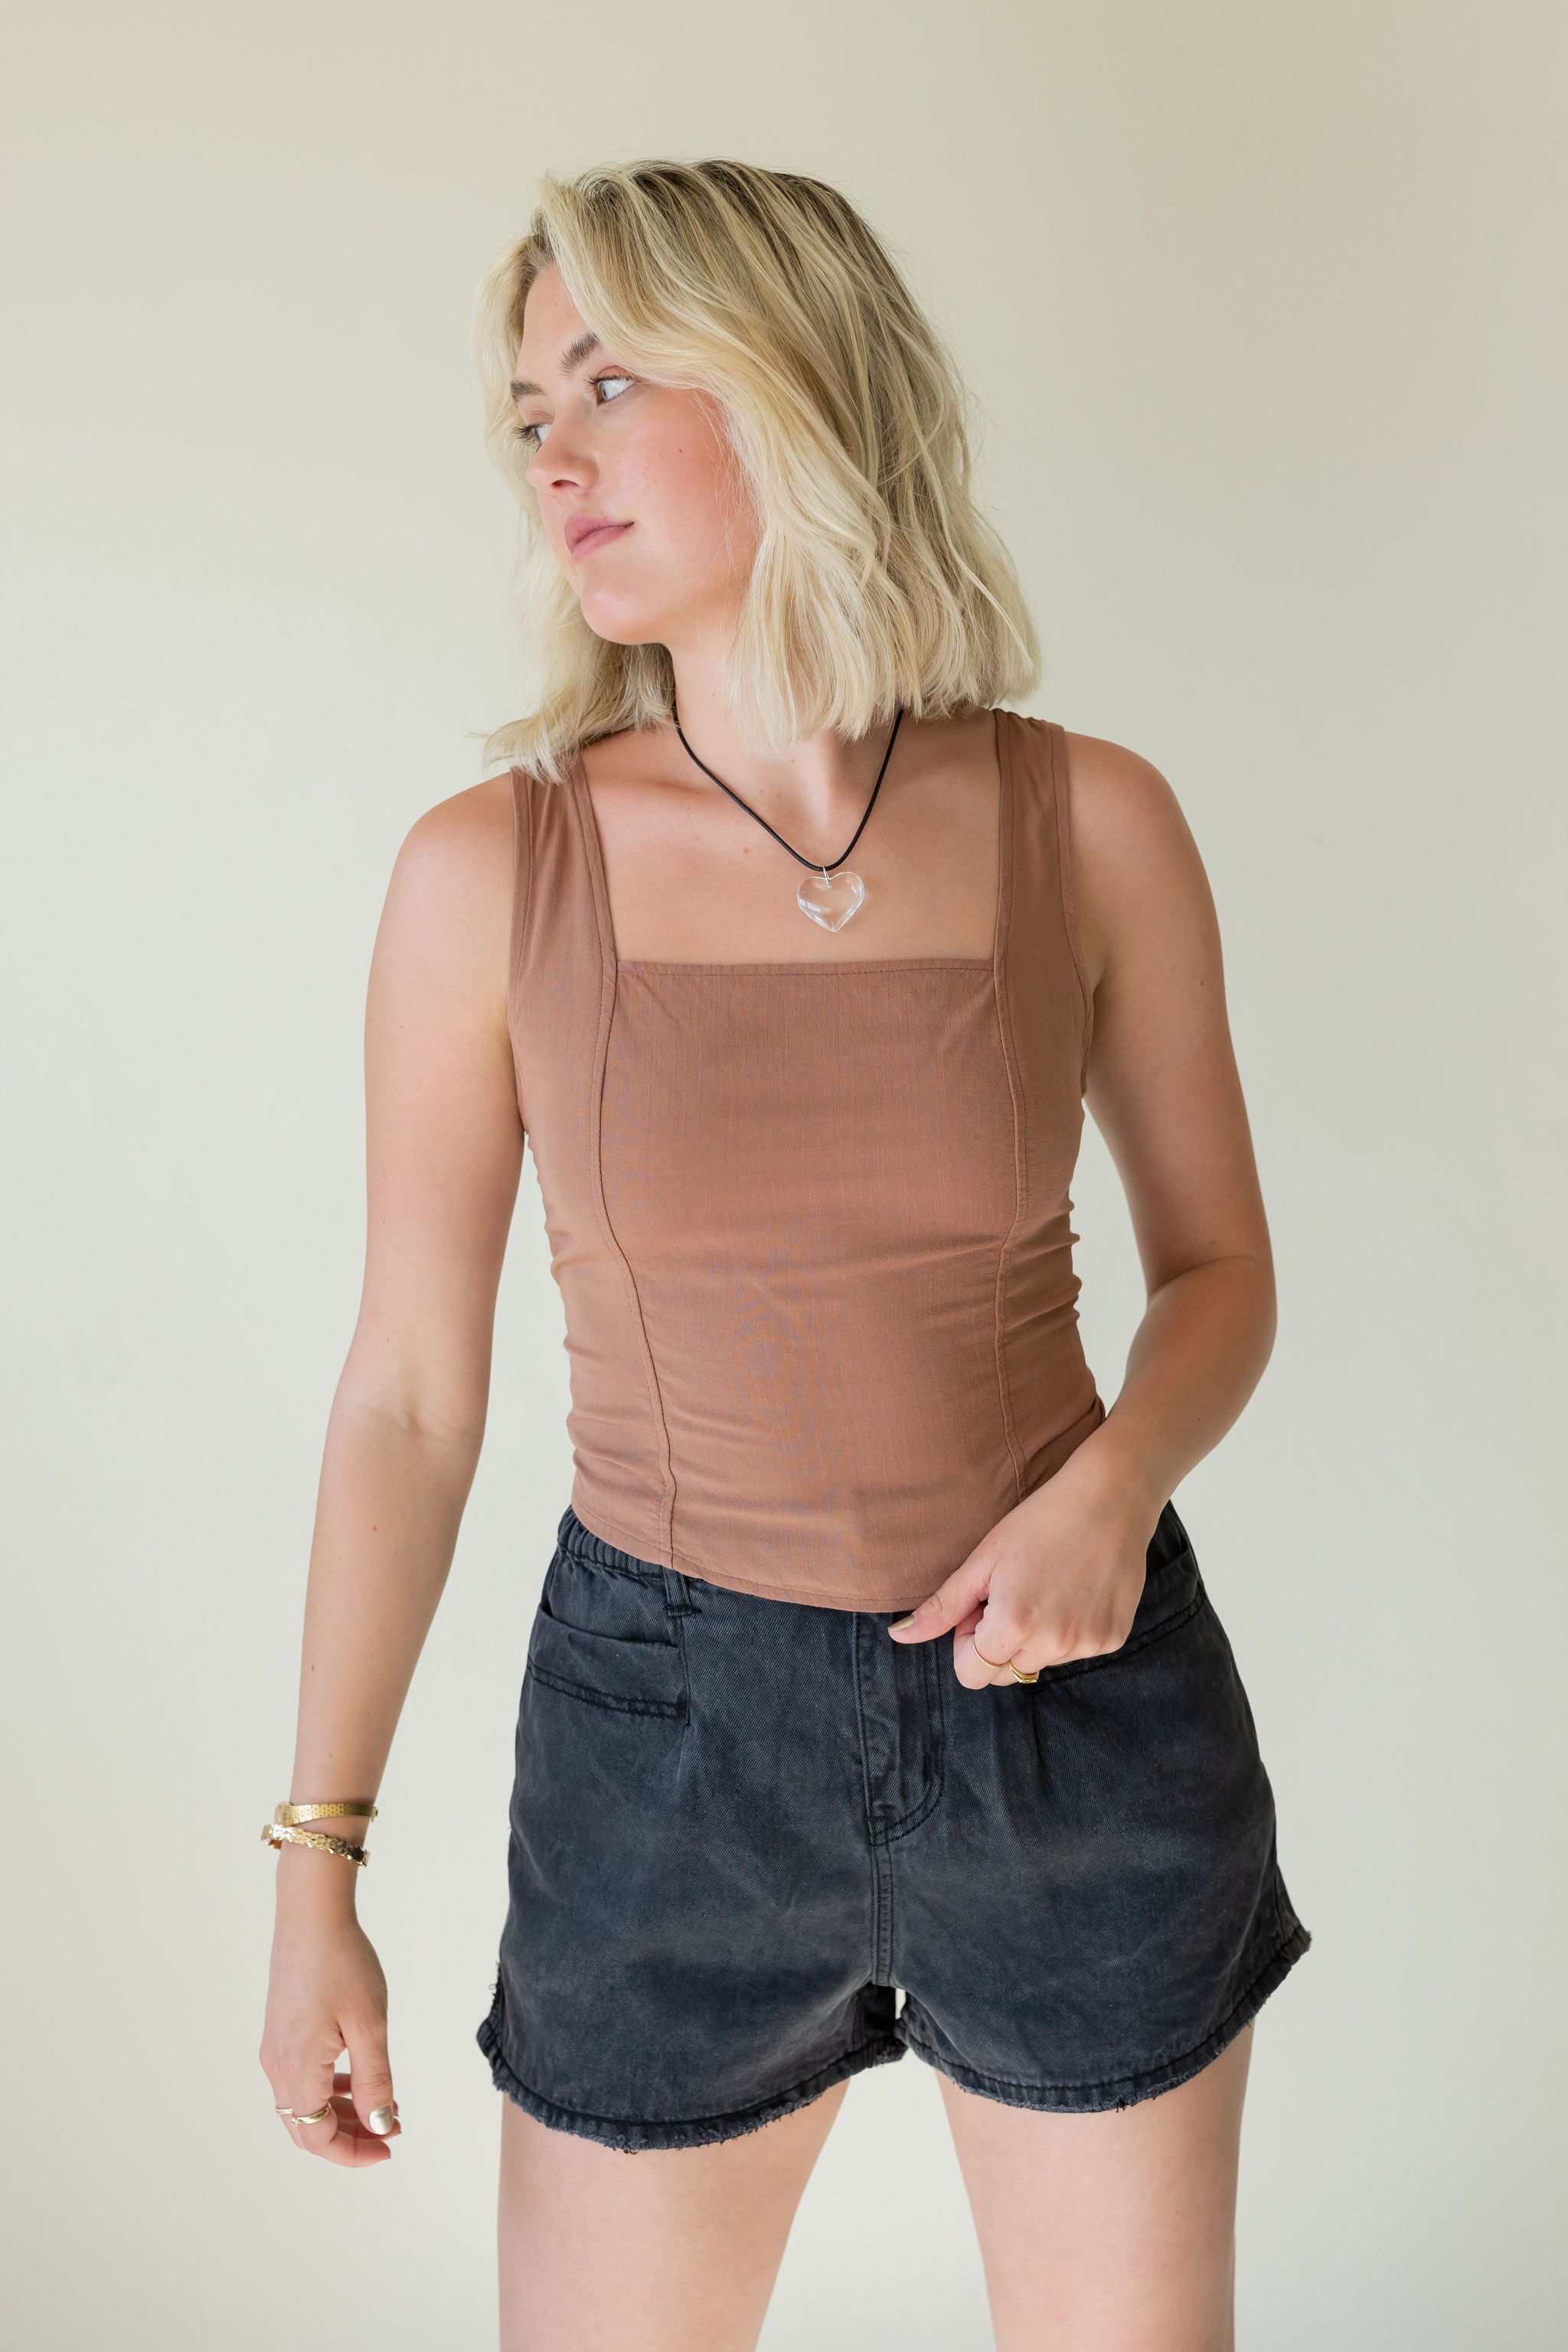 Get Here Sleeveless Top by For Good